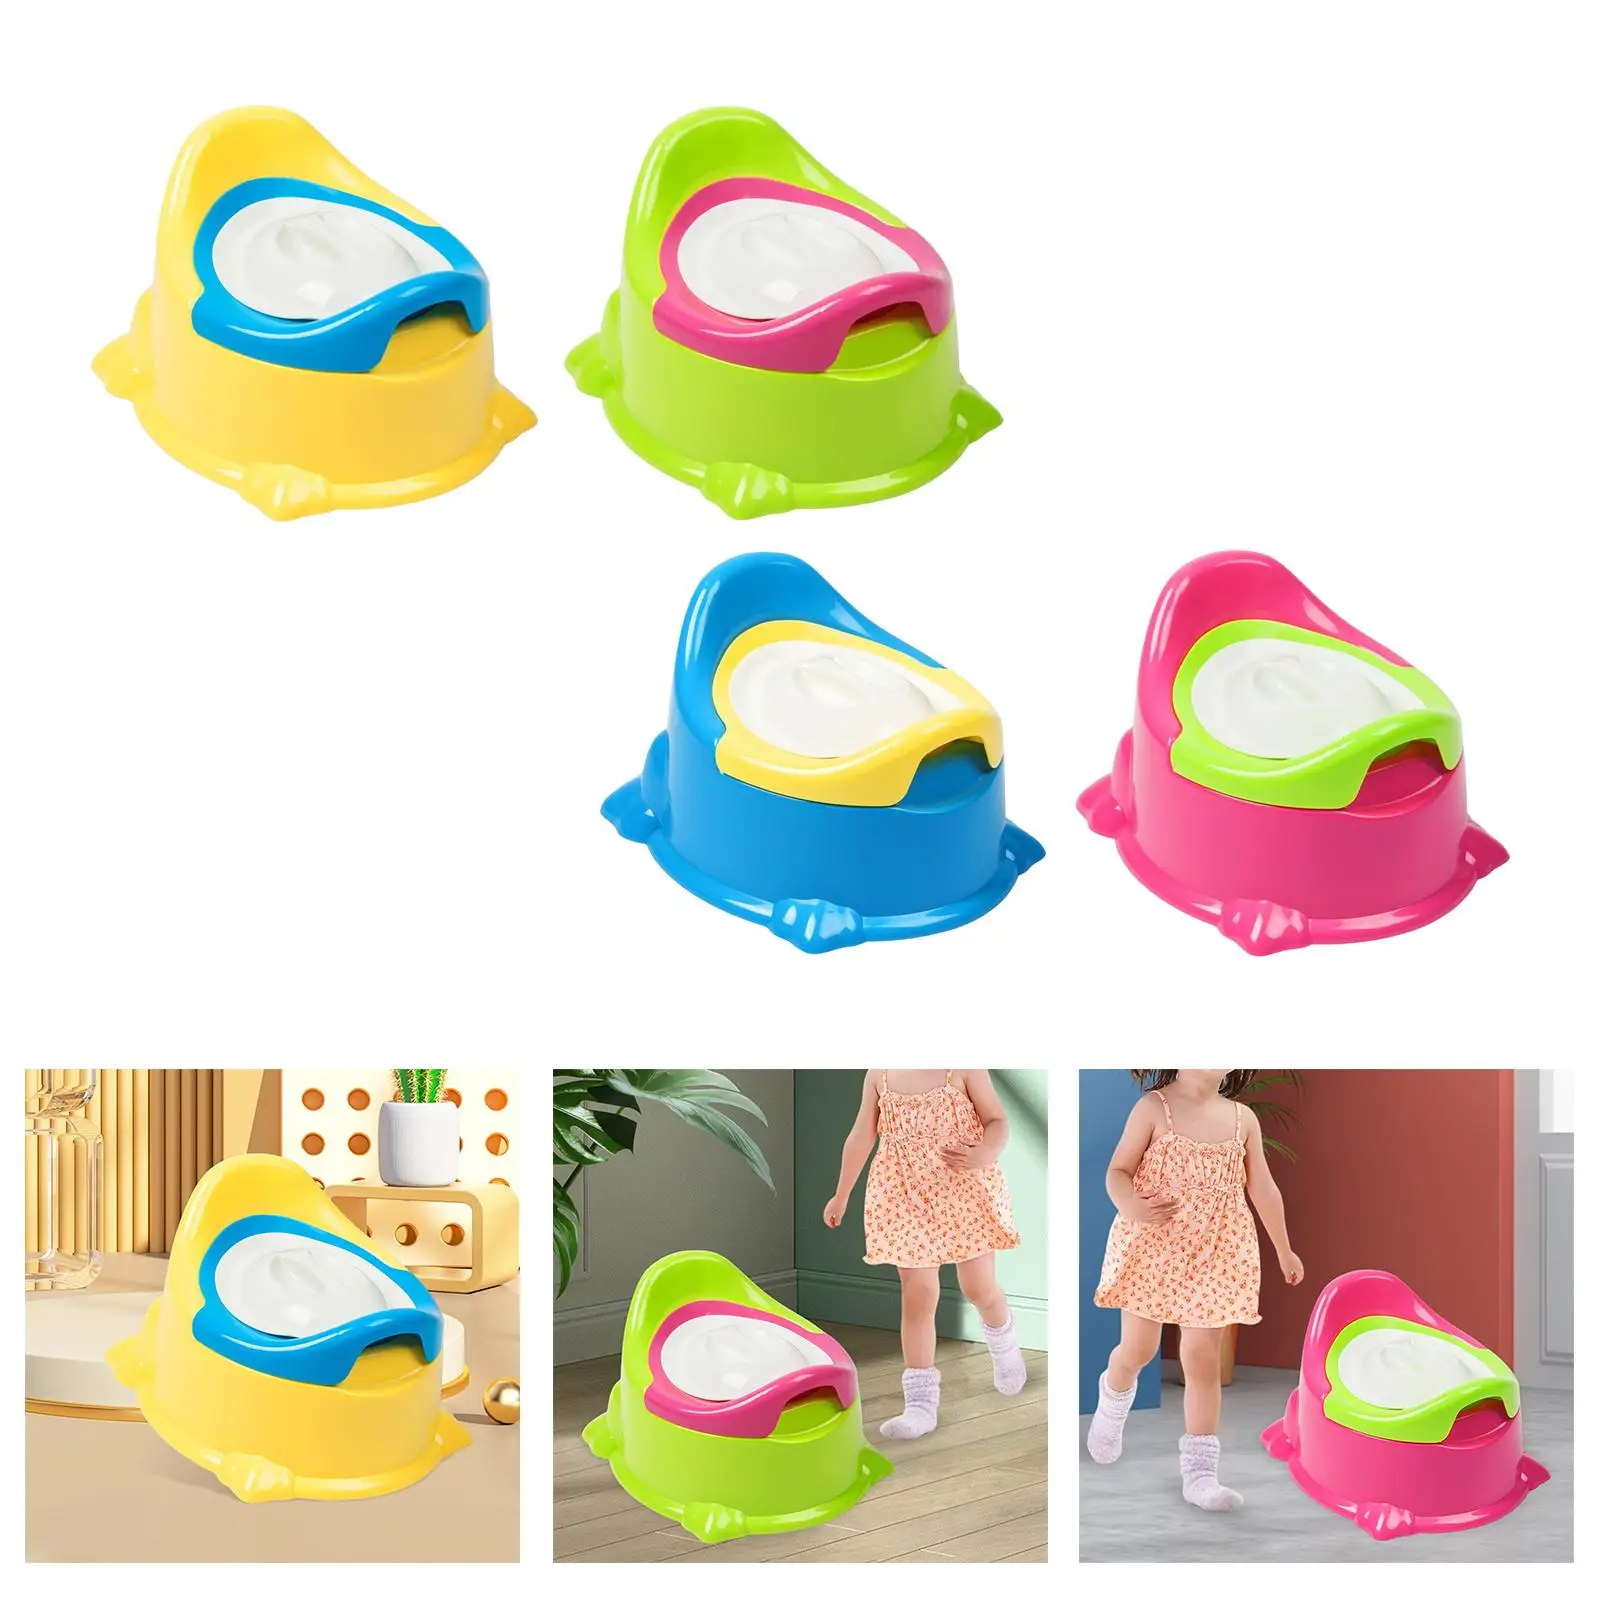 Portable Childrens Potty Kids Training Toilet Seat Comfortable Baby Potty Trainer Toilet Chair Seat for Babies 6-12 Month Kids